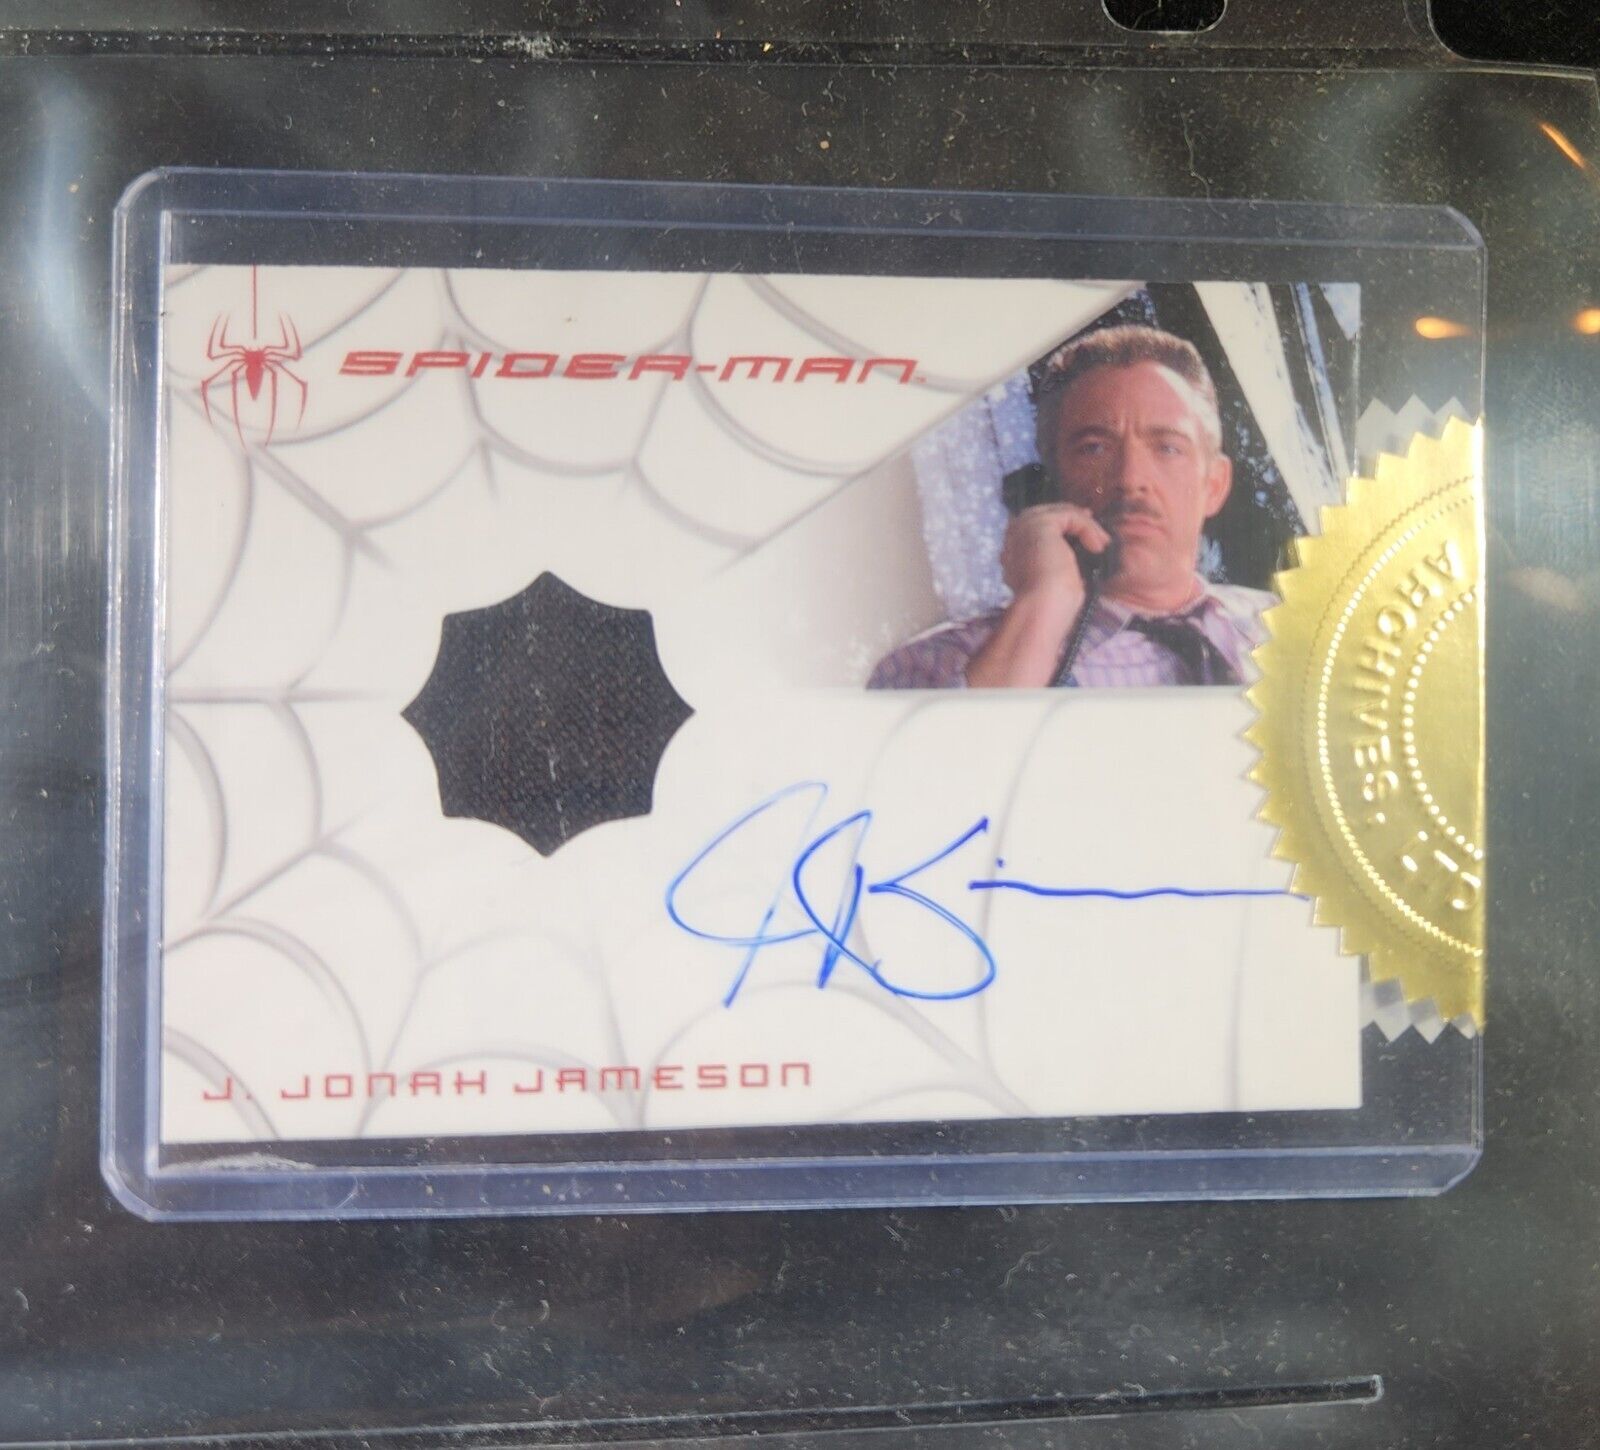 J.K. Simmons Autographed Case Incentive Costume Card - Spider-Man Trading Cards